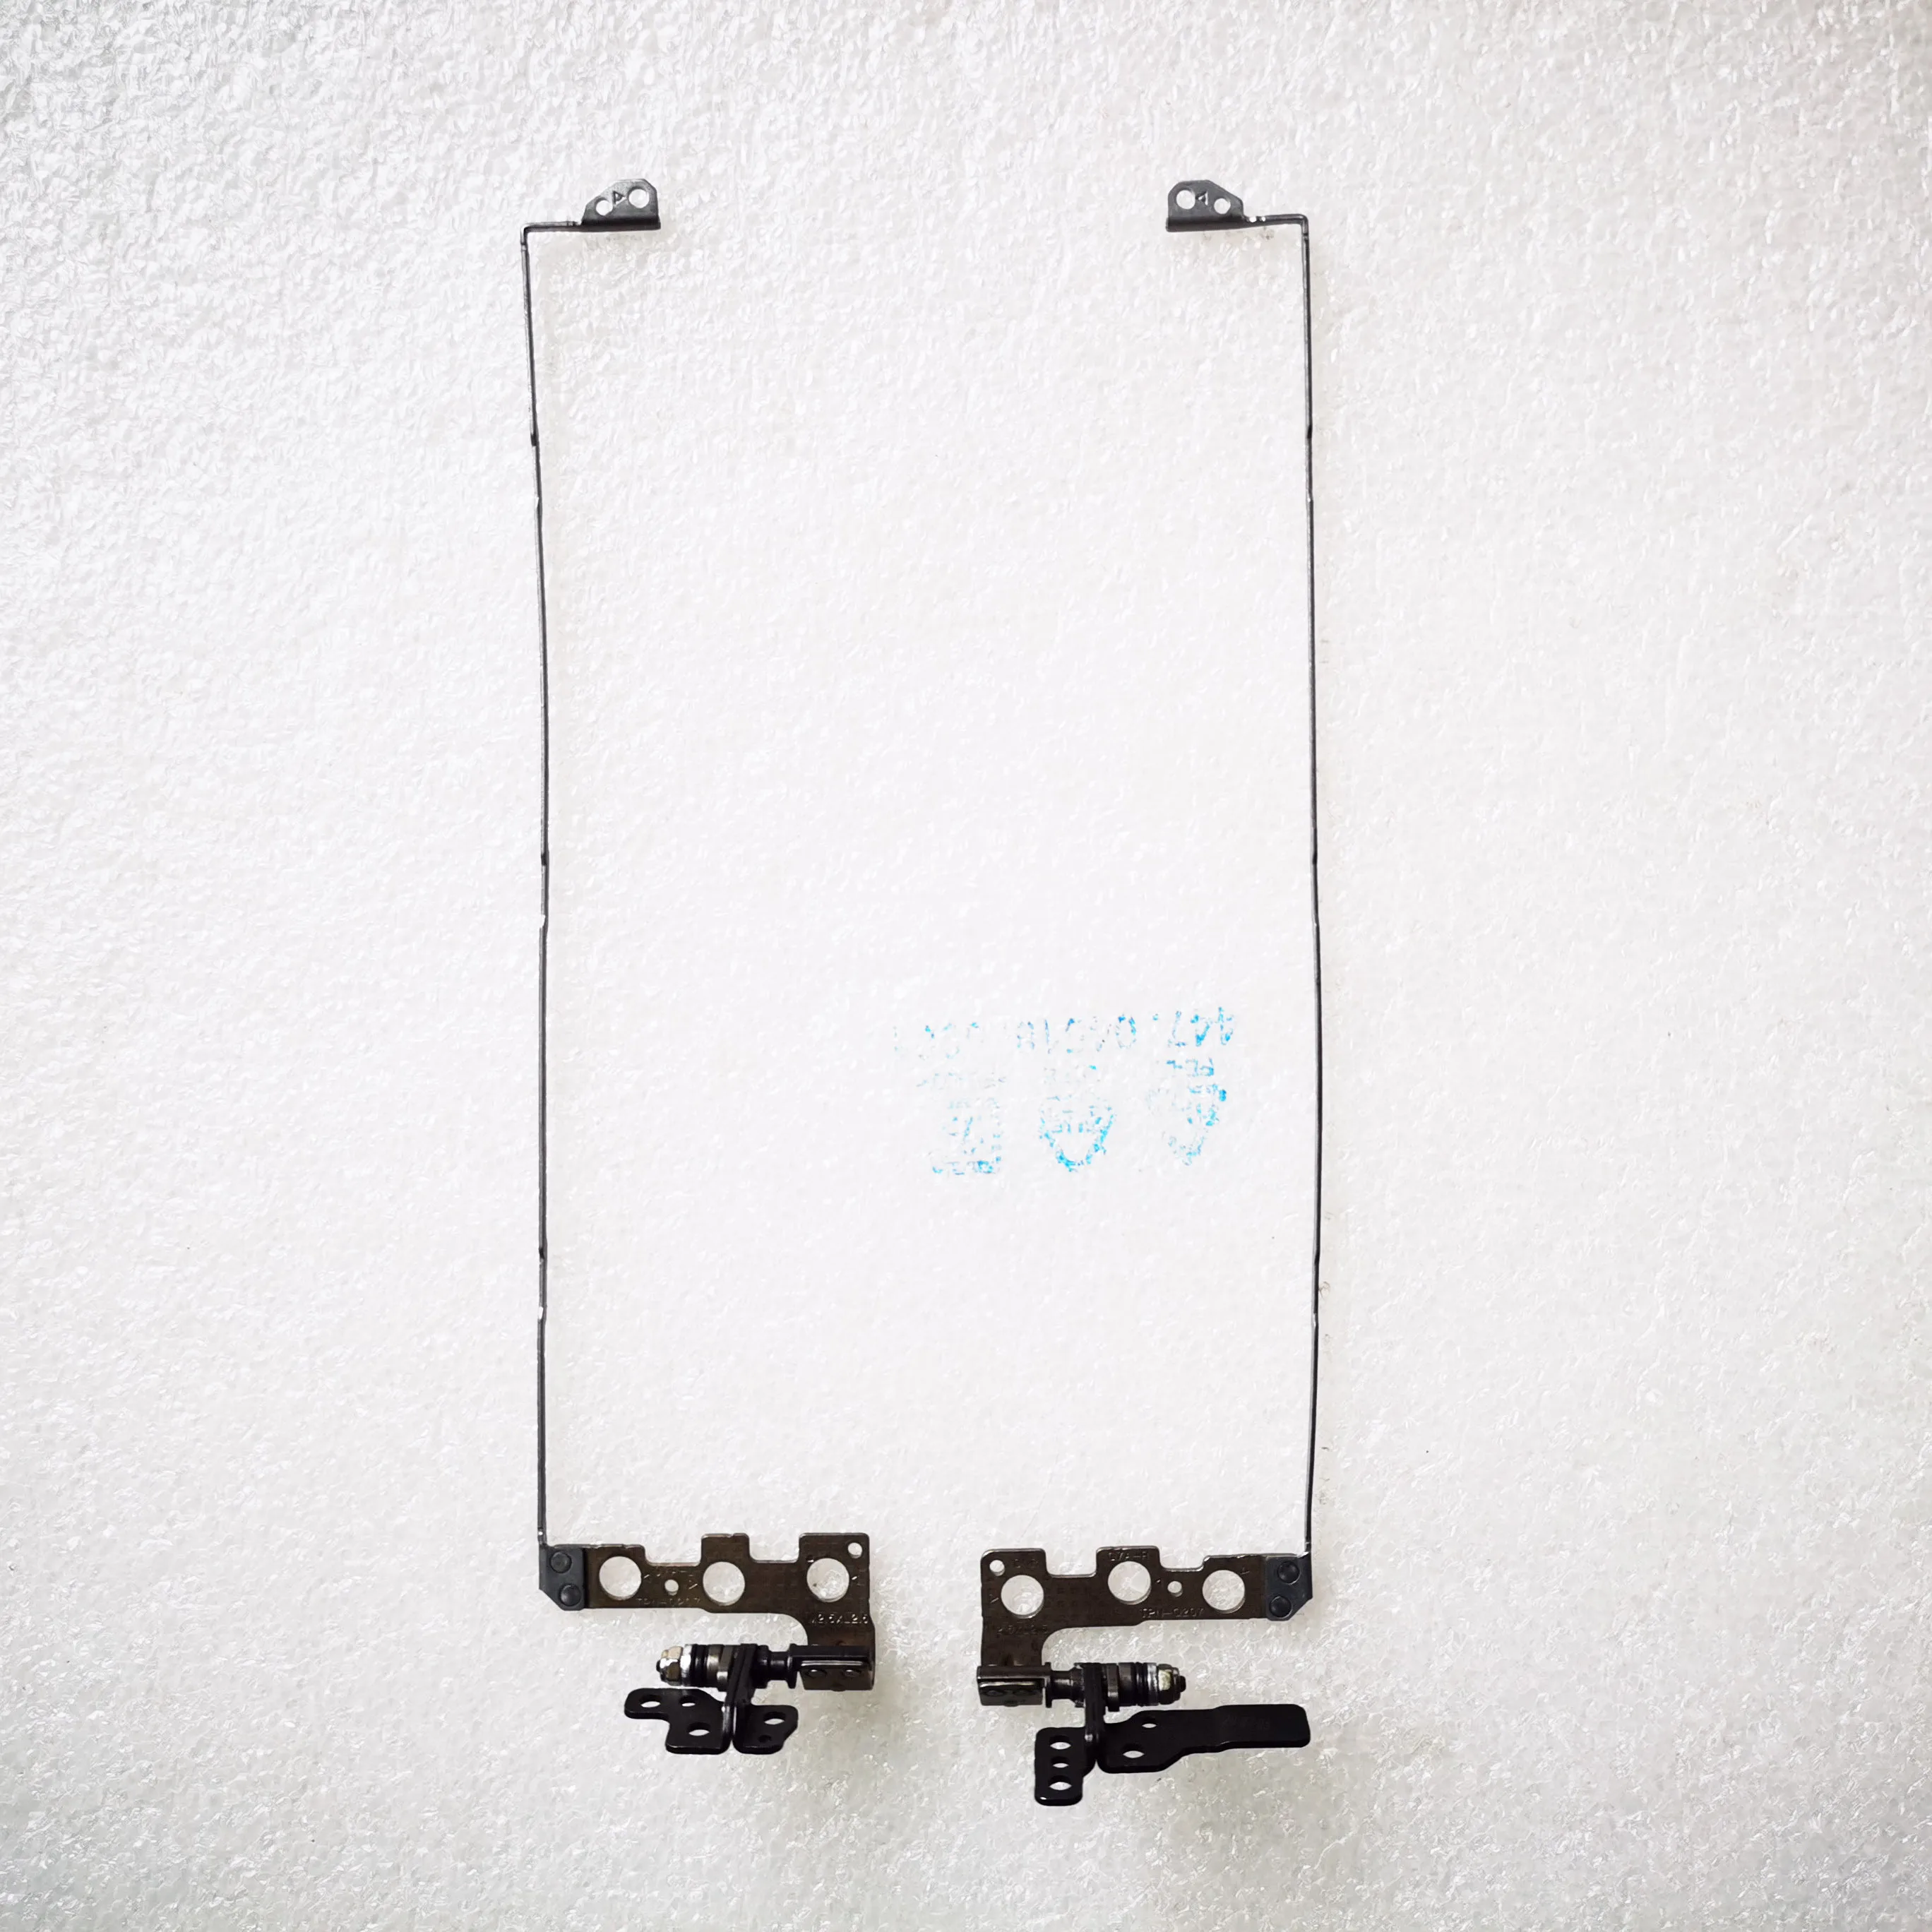 

NEW Laptop LCD Hinges 14-CE for HP Pavilion 14 14-CE TPN-Q207 G7A Display hinge L&R FBG7A0004010 FBG7A002010 FREE SHIPPING